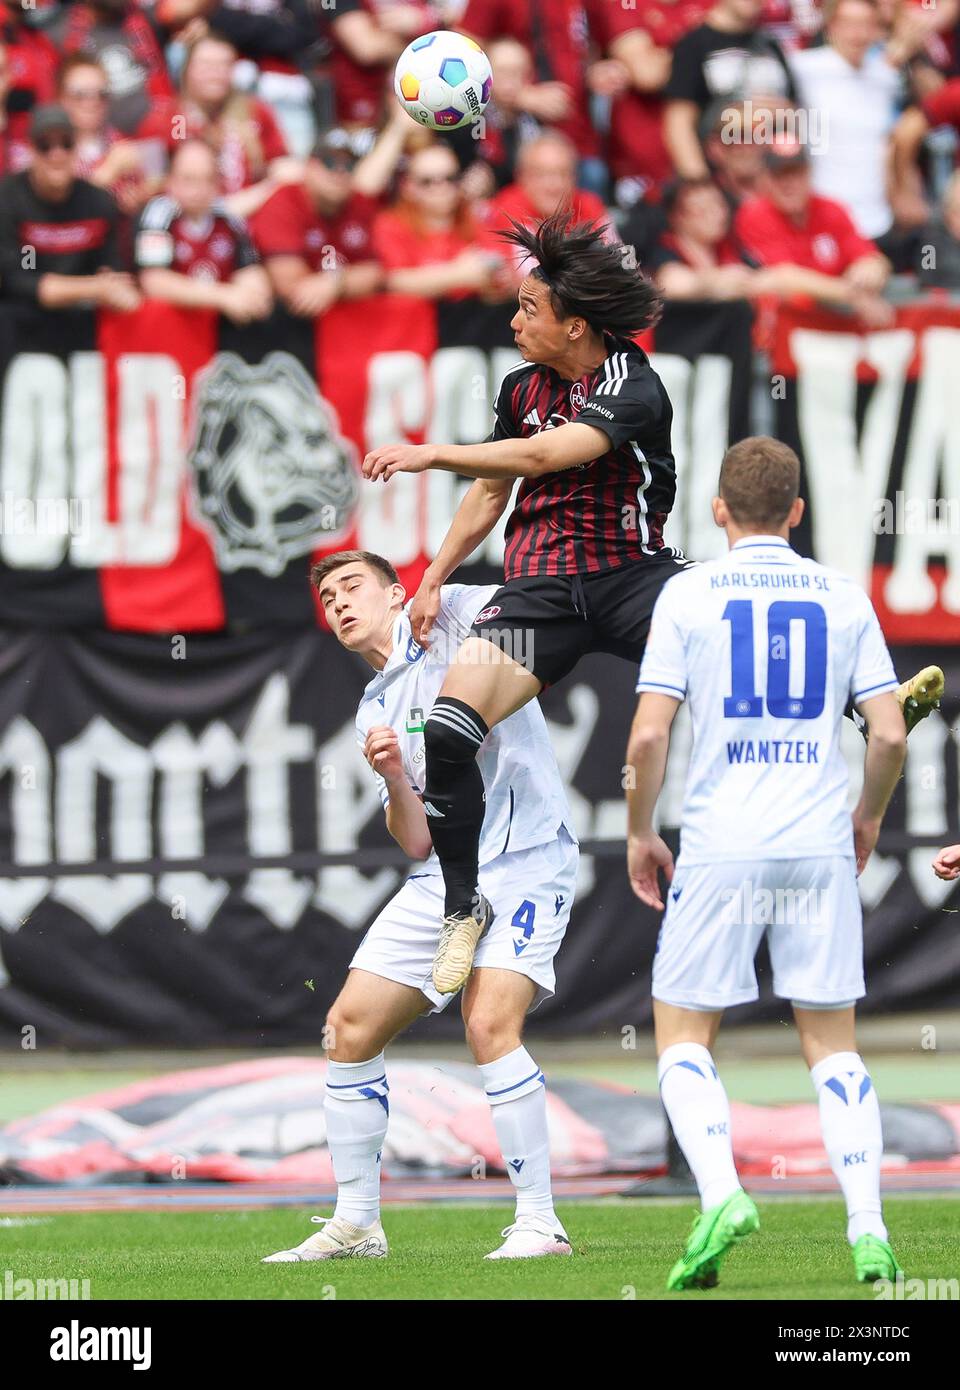 Nuremberg, Germany. 28th Apr, 2024. Soccer: Bundesliga 2, 1. FC Nürnberg - Karlsruher SC, Matchday 31, Max-Morlock-Stadion. Nuremberg's Daichi Hayashi (M) goes up for a header against Karlsruhe's Marcel Beifus (l). Credit: Daniel Löb/dpa - IMPORTANT NOTE: In accordance with the regulations of the DFL German Football League and the DFB German Football Association, it is prohibited to utilize or have utilized photographs taken in the stadium and/or of the match in the form of sequential images and/or video-like photo series./dpa/Alamy Live News Stock Photo